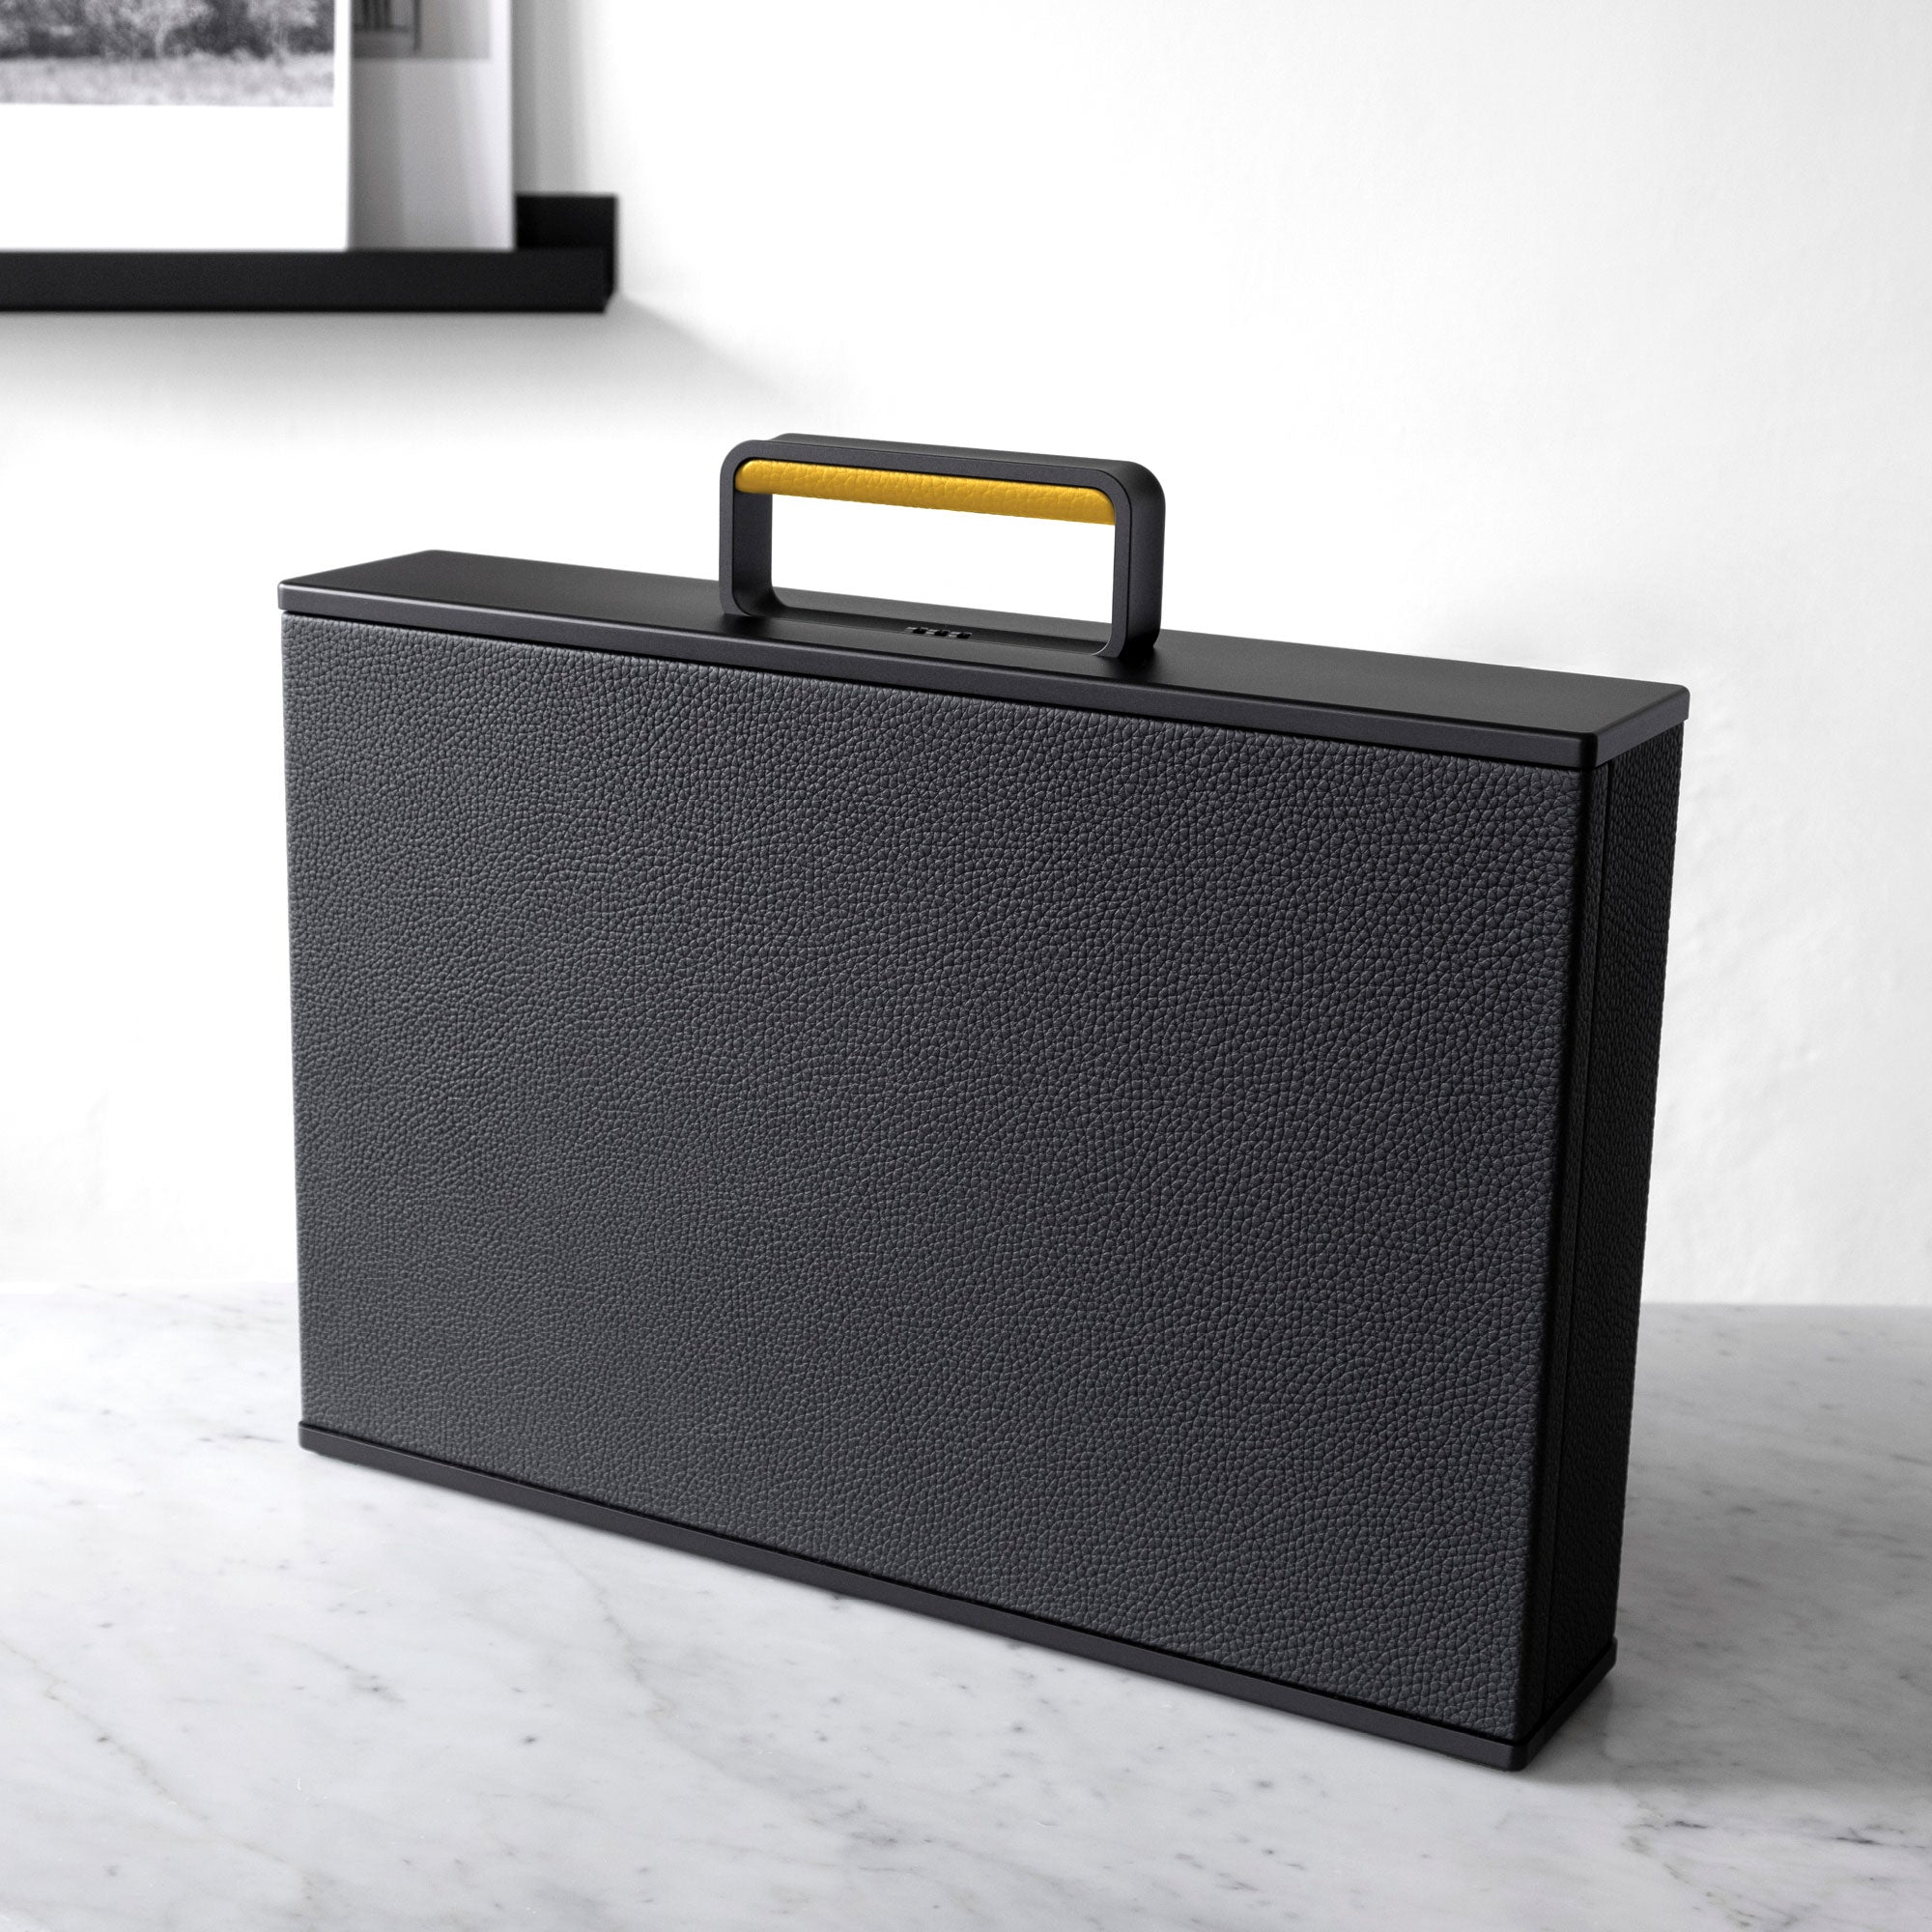 Lifestyle photo showing the vibrant sunflower leather handle detail and black leather of this boldly minimalist briefcase